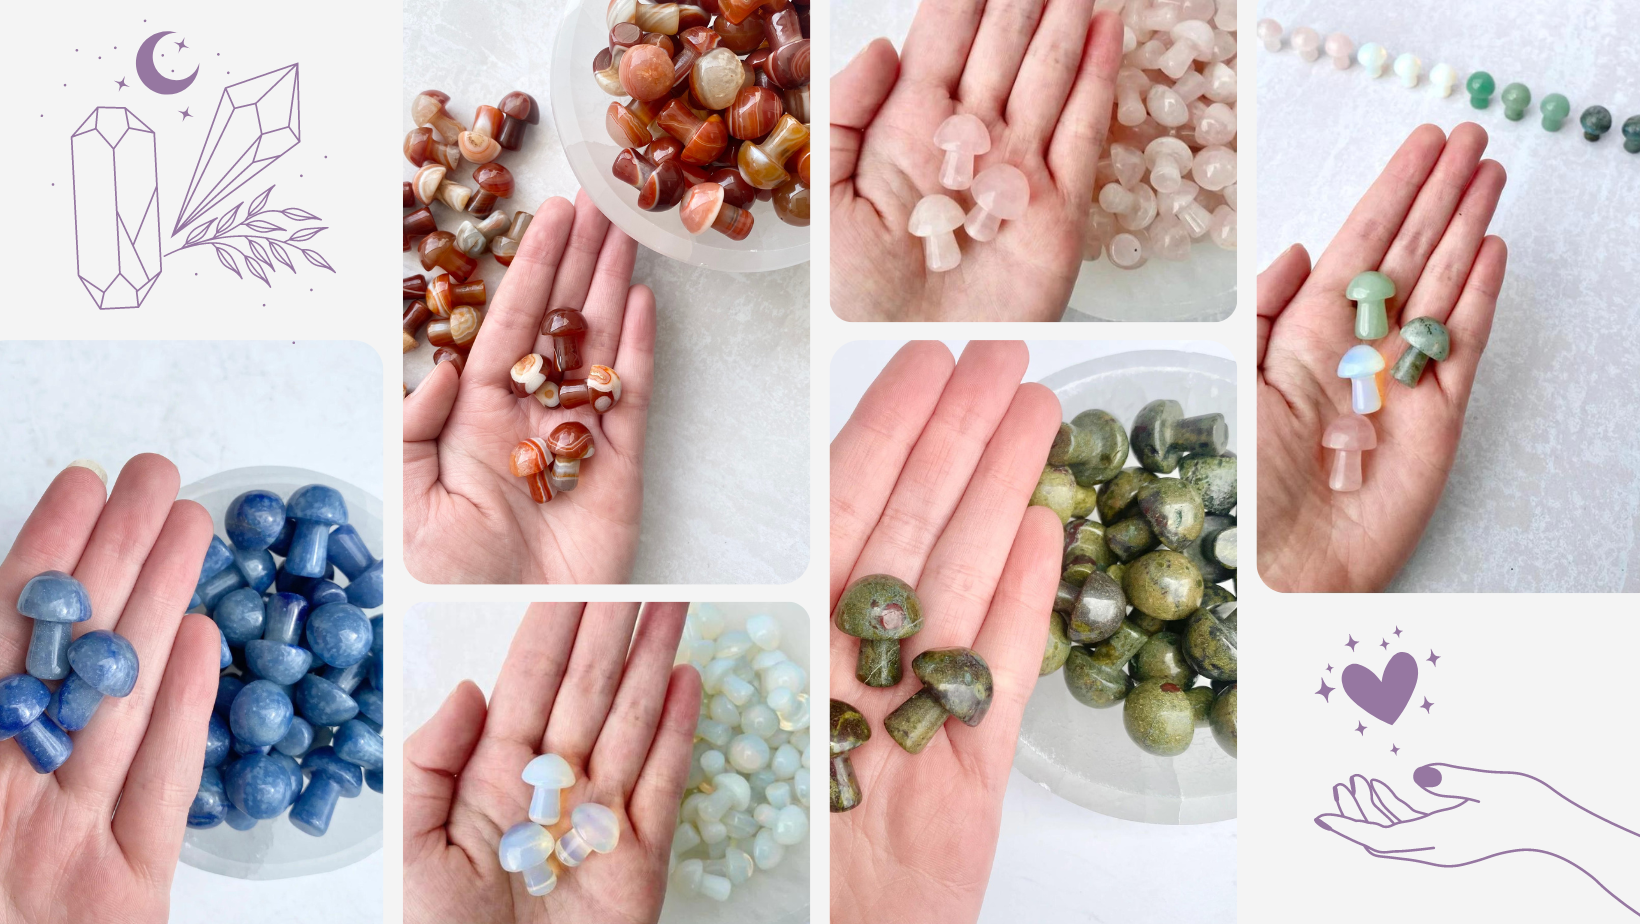 SMALL BUT MIGHTY | TRENDING MUSHROOMS, MOON & STAR CRYSTALS